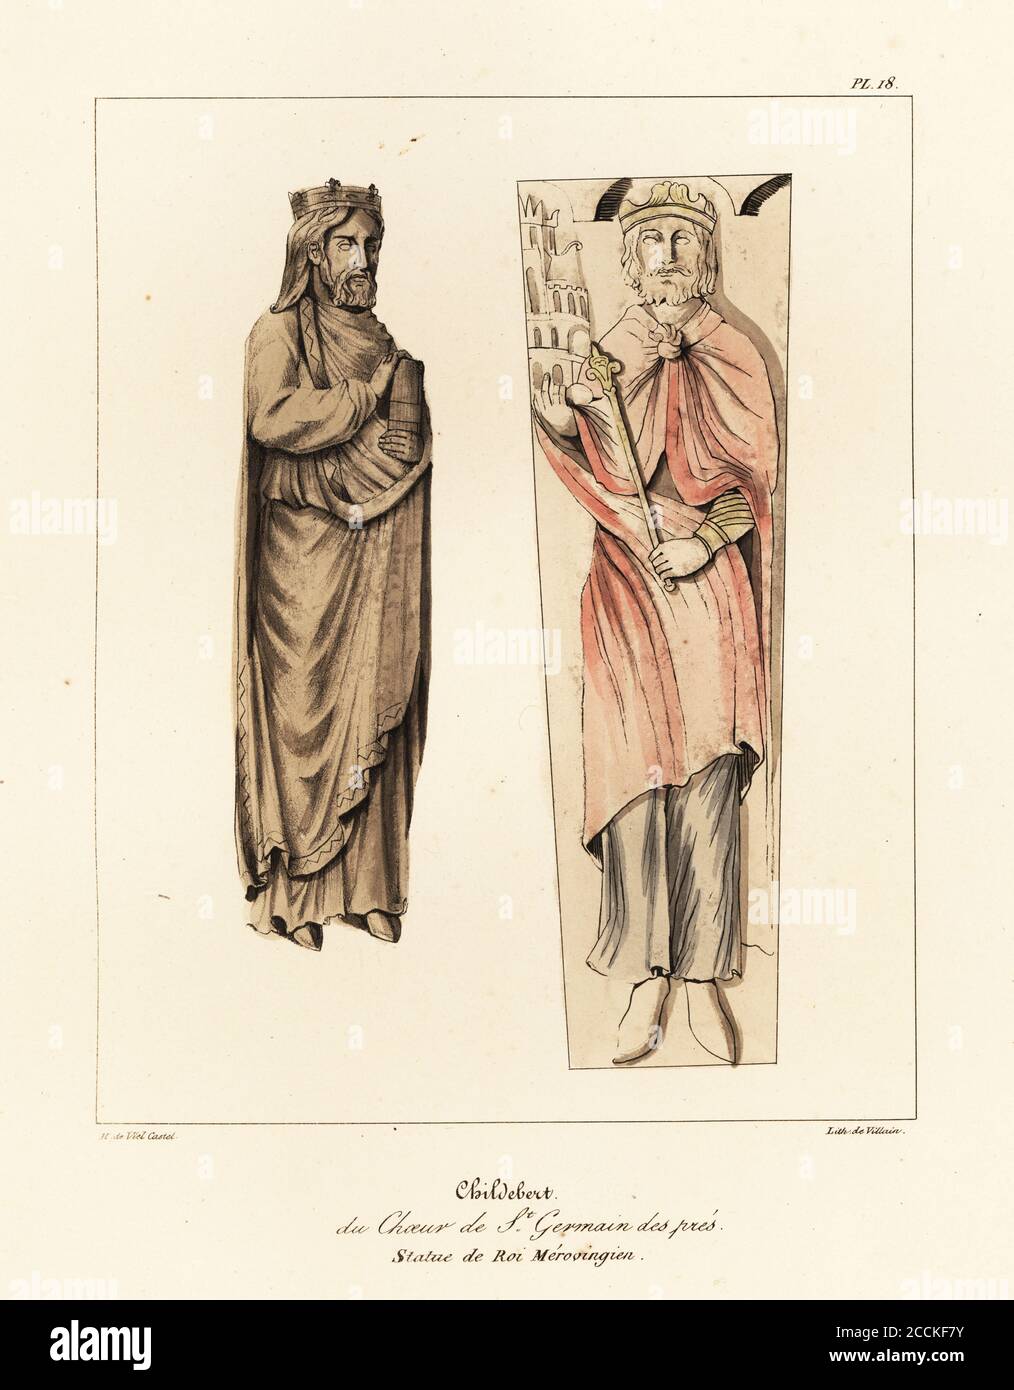 Childebert I (c. 496-558), King of Paris, Frankish King of the Merovingian dynasty. From his tomb in the choir, and statue in the Refectory of Saint Germain de Pres, Paris. Childebert, du choeur de St. Germain des pres, Statue de Roi Merovingien. Handcoloured lithograph by Villain after an illustration by Horace de Viel-Castel from his Collection des costumes, armes et meubles pour servir à l'histoire de la France (Collection of costumes, weapons and furniture to be used in the history of France), Treuttel & Wurtz, Bossange, 1827. Stock Photo